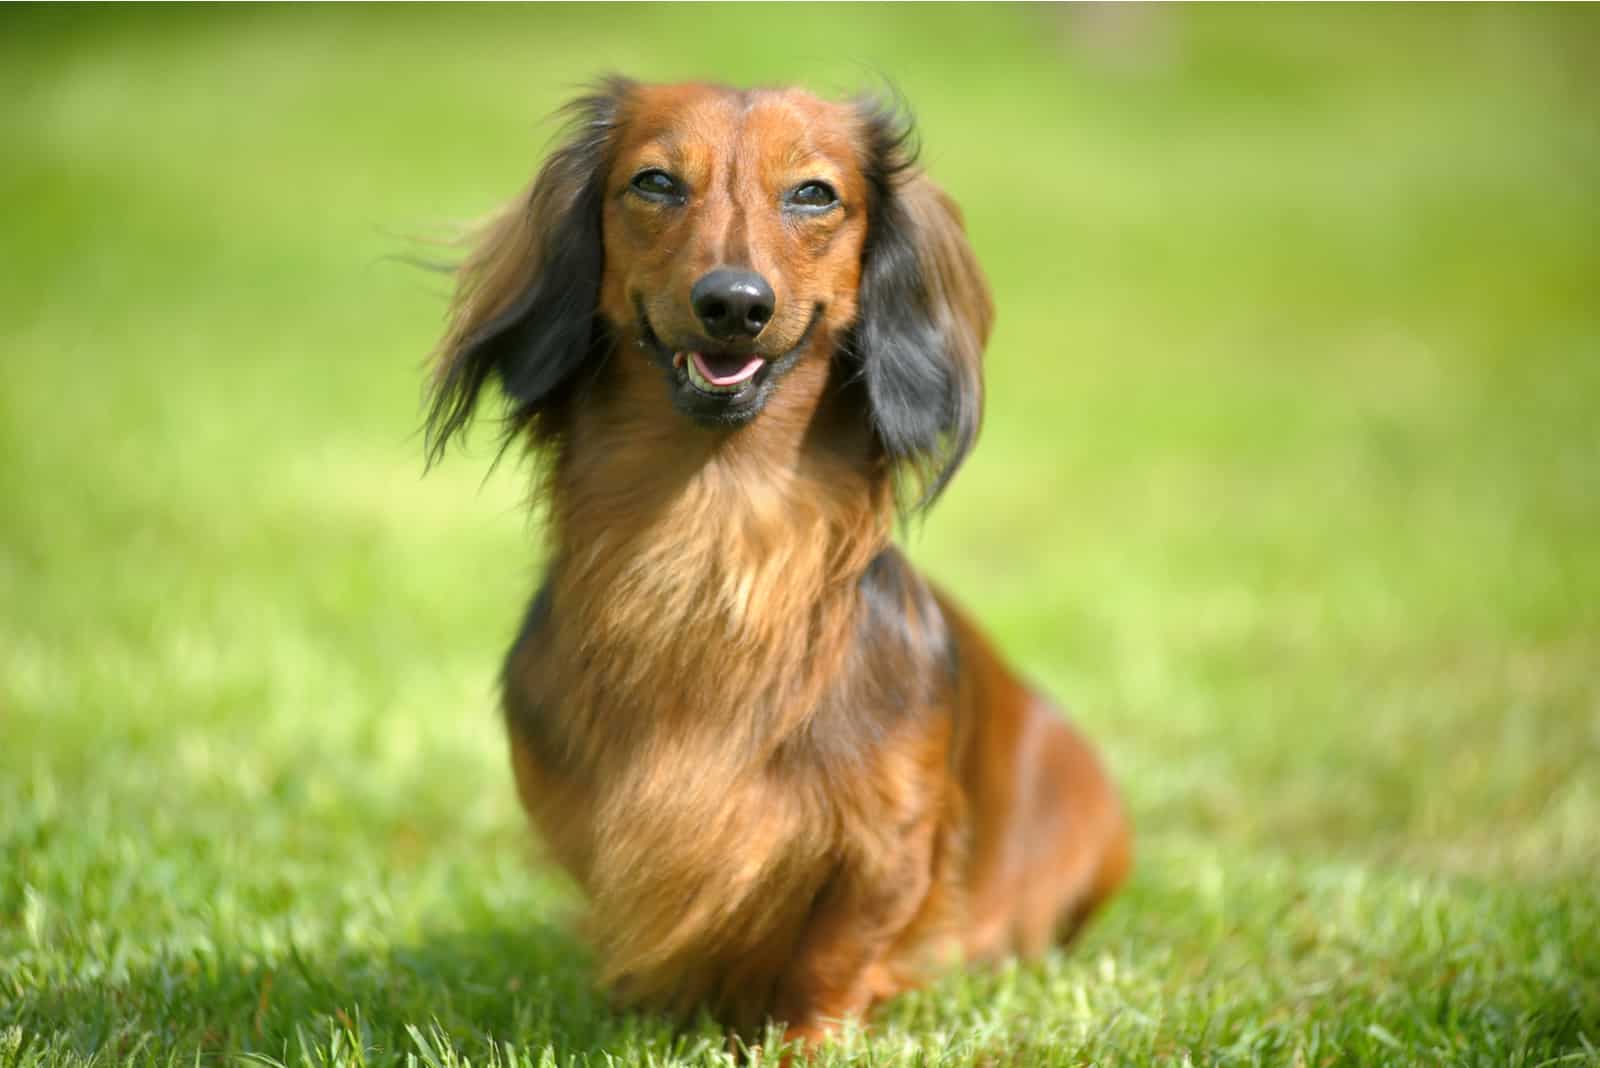 Red Long-Haired Dachshund on the Grass